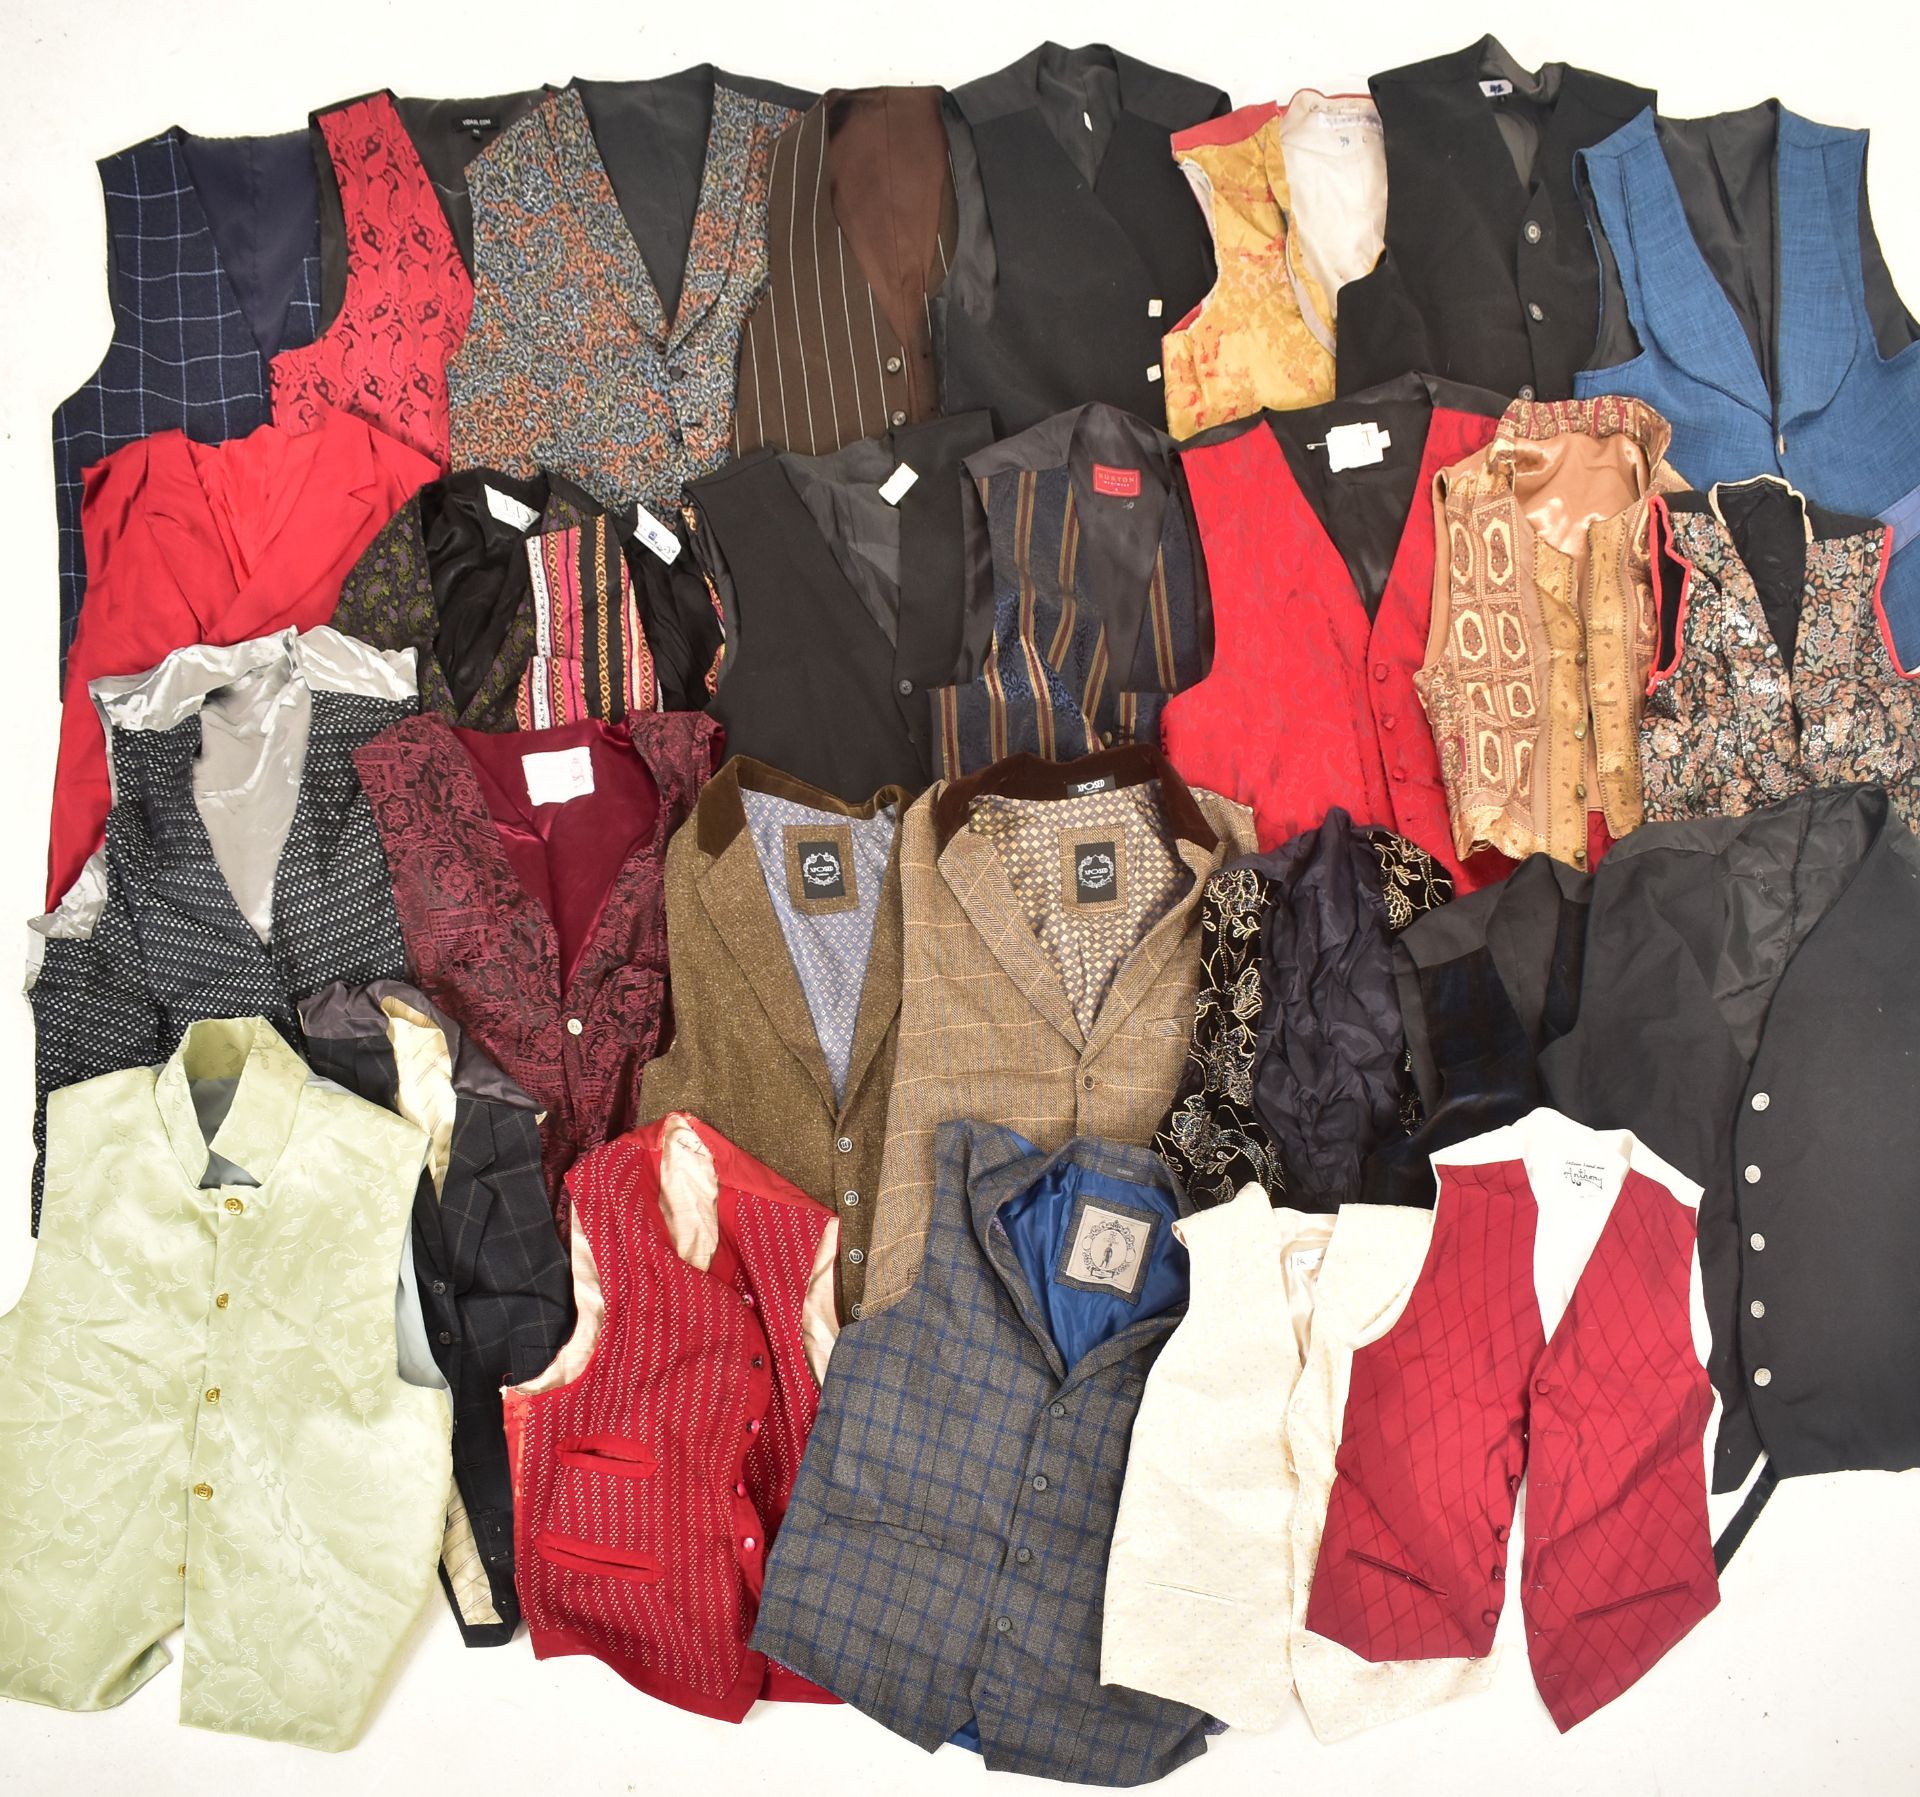 LARGE COLLECTION OF VINTAGE THEATRE & FANCY DRESS WAISTCOATS